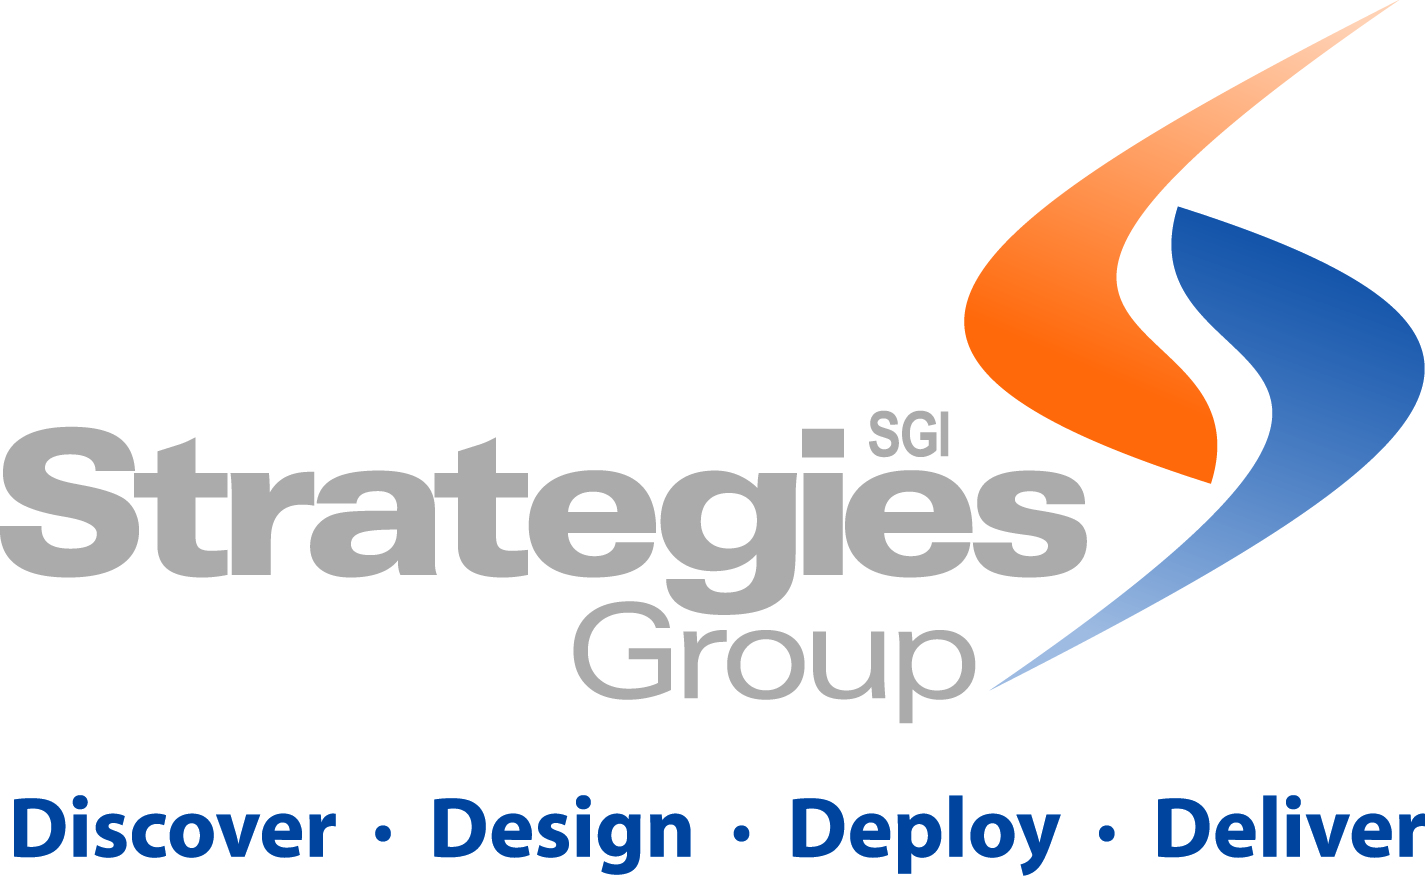 Strategies Group offers construction ERP software and consulting services to clients throughout the Southeast.